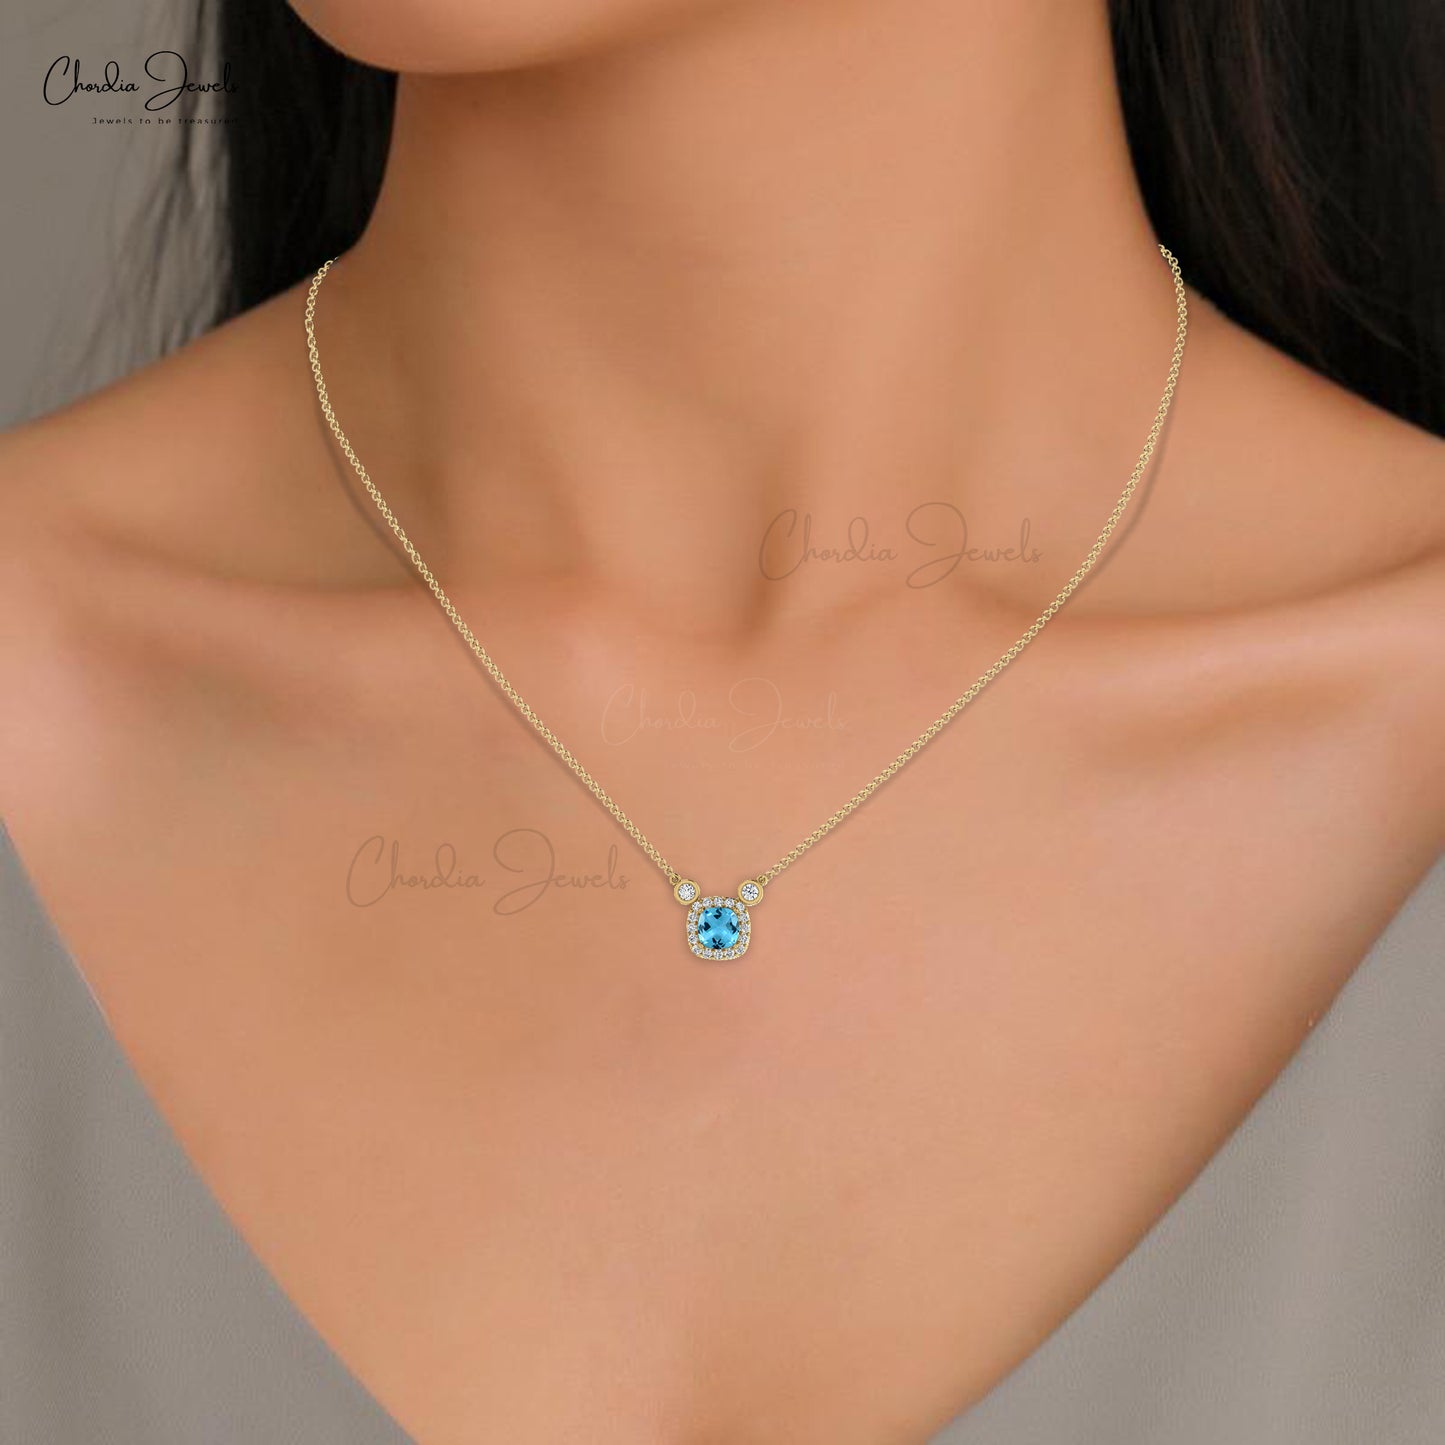 Load image into Gallery viewer, Natural Swiss Blue Topaz Necklace 14k Solid Gold Diamond Halo Necklace 4mm Cushion Cut Gemstone Handmade Necklace For Women&amp;#39;s
